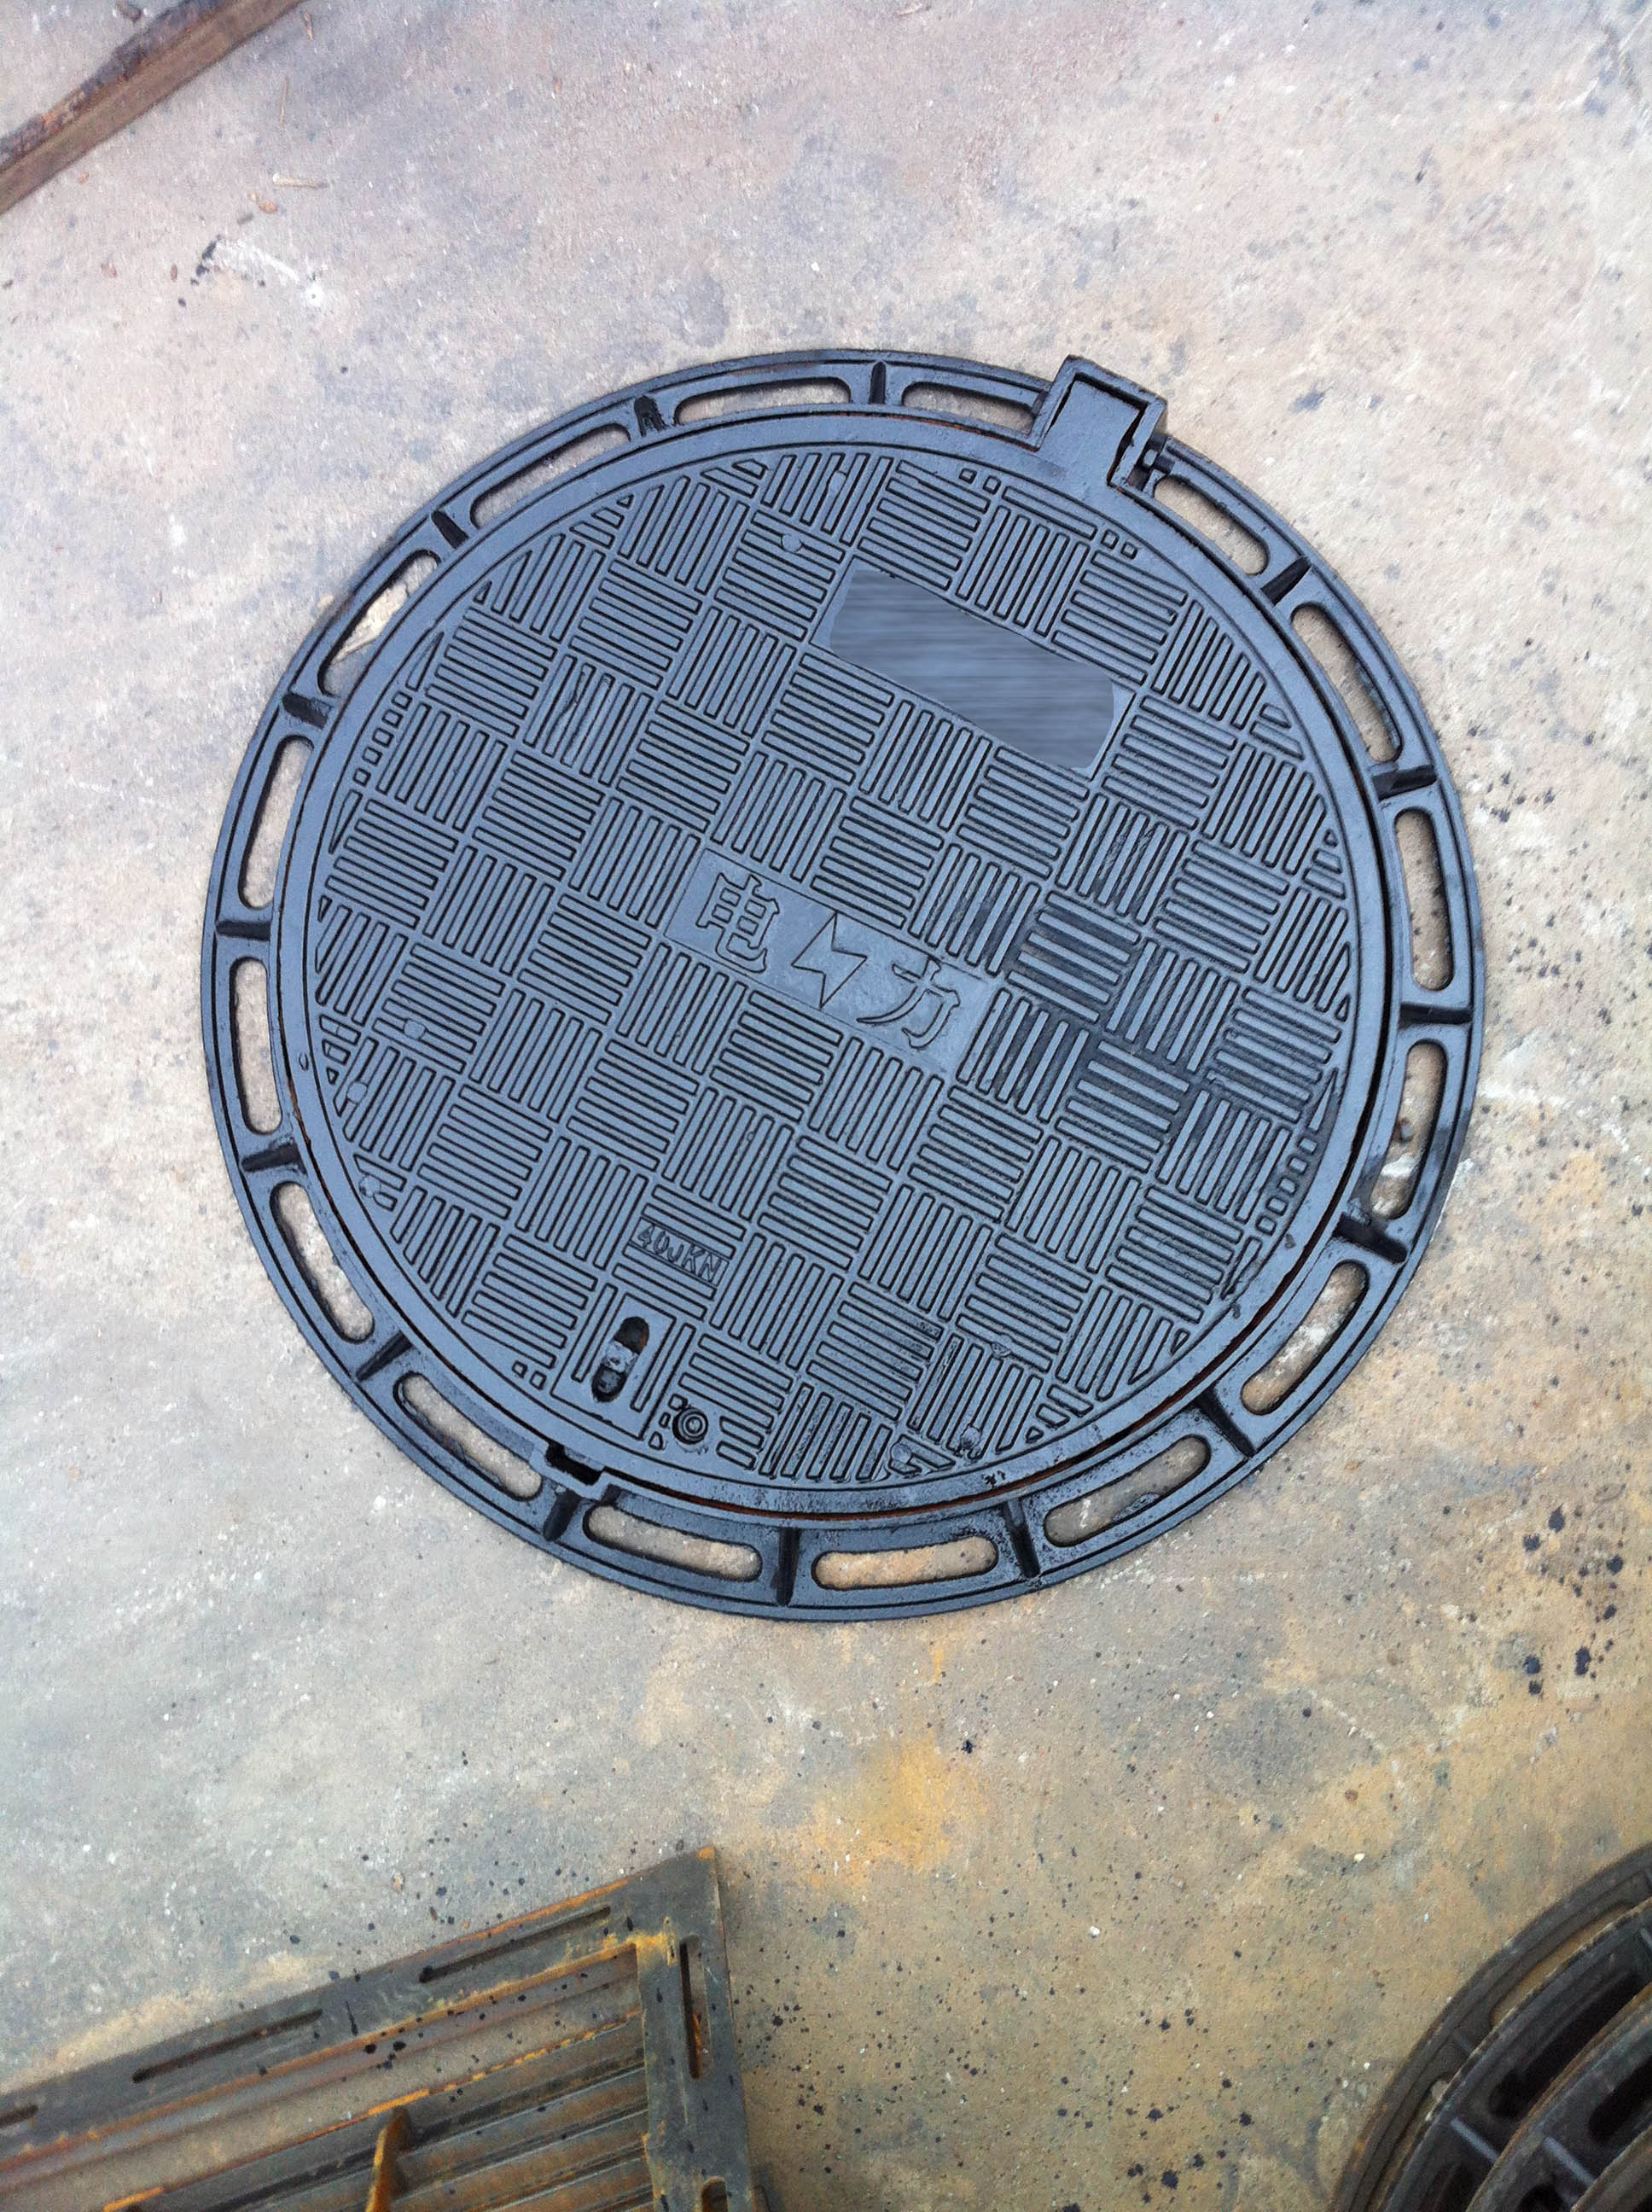 Casting Manhole Cover: Key to Successful Trade in Urban Infrastructure